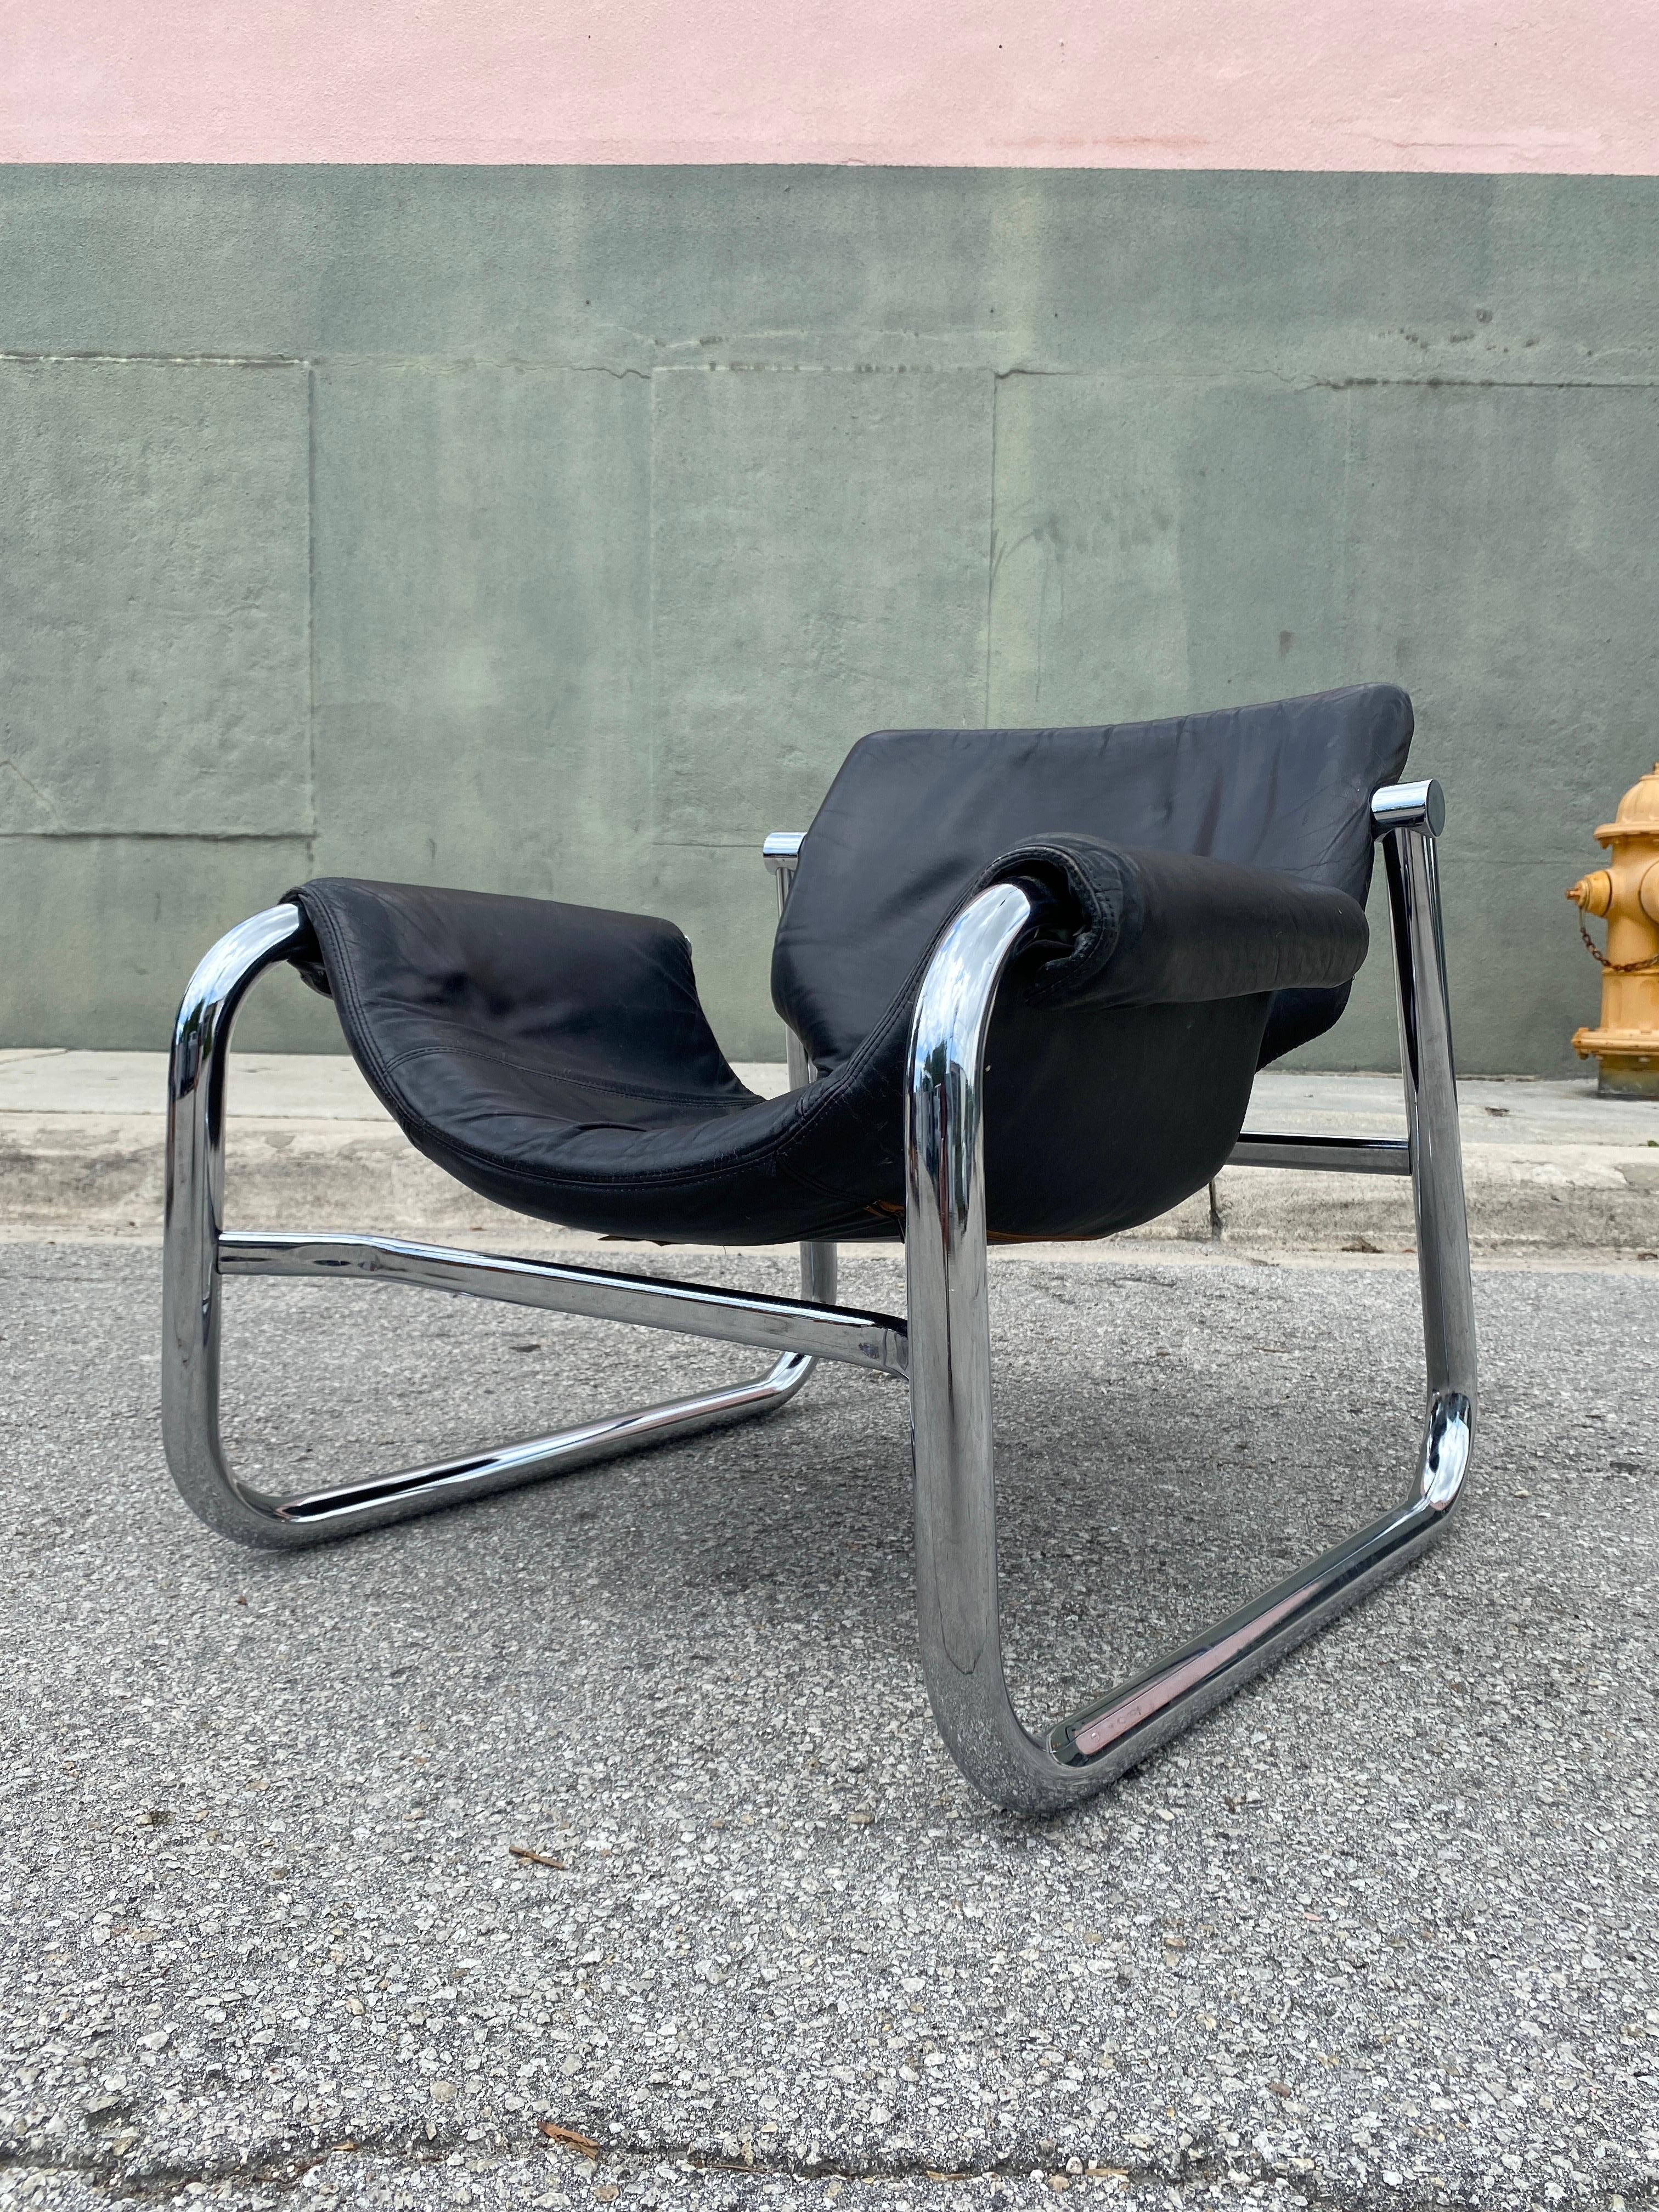 Mid-20th Century Mid-Century Maurice Burke “Alpha” Brazilian Leather and Chrome Lounge Chair